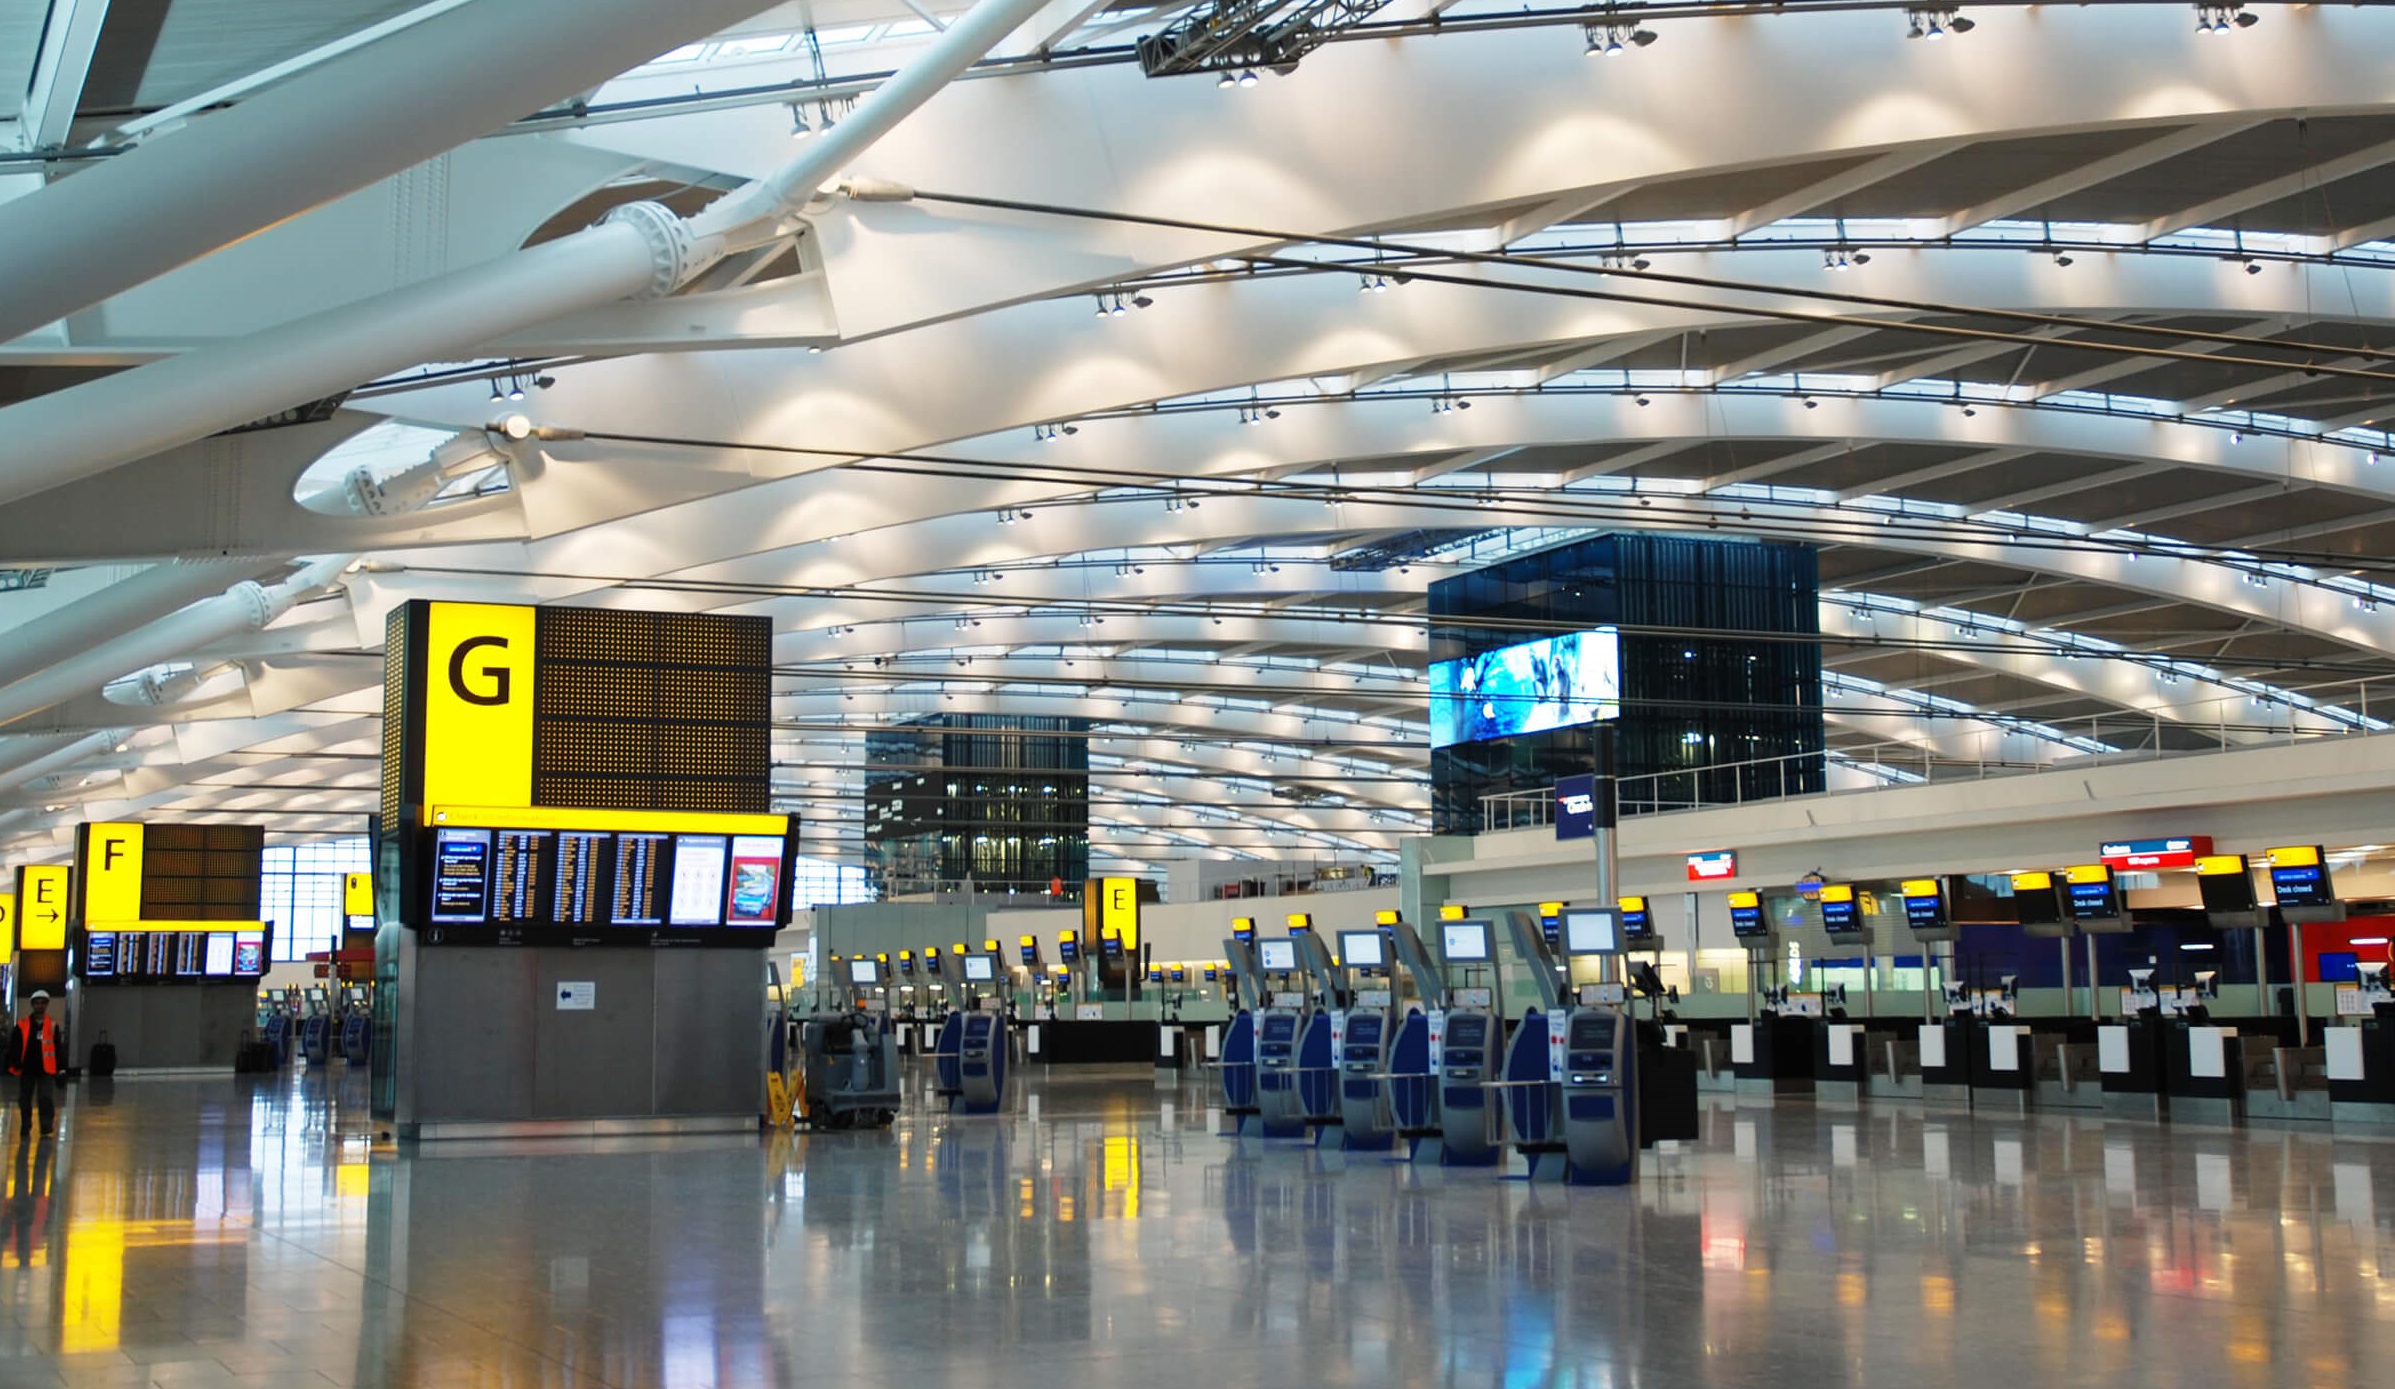 Heathrow Airpot to Trial Covid-19 Detection Technologies